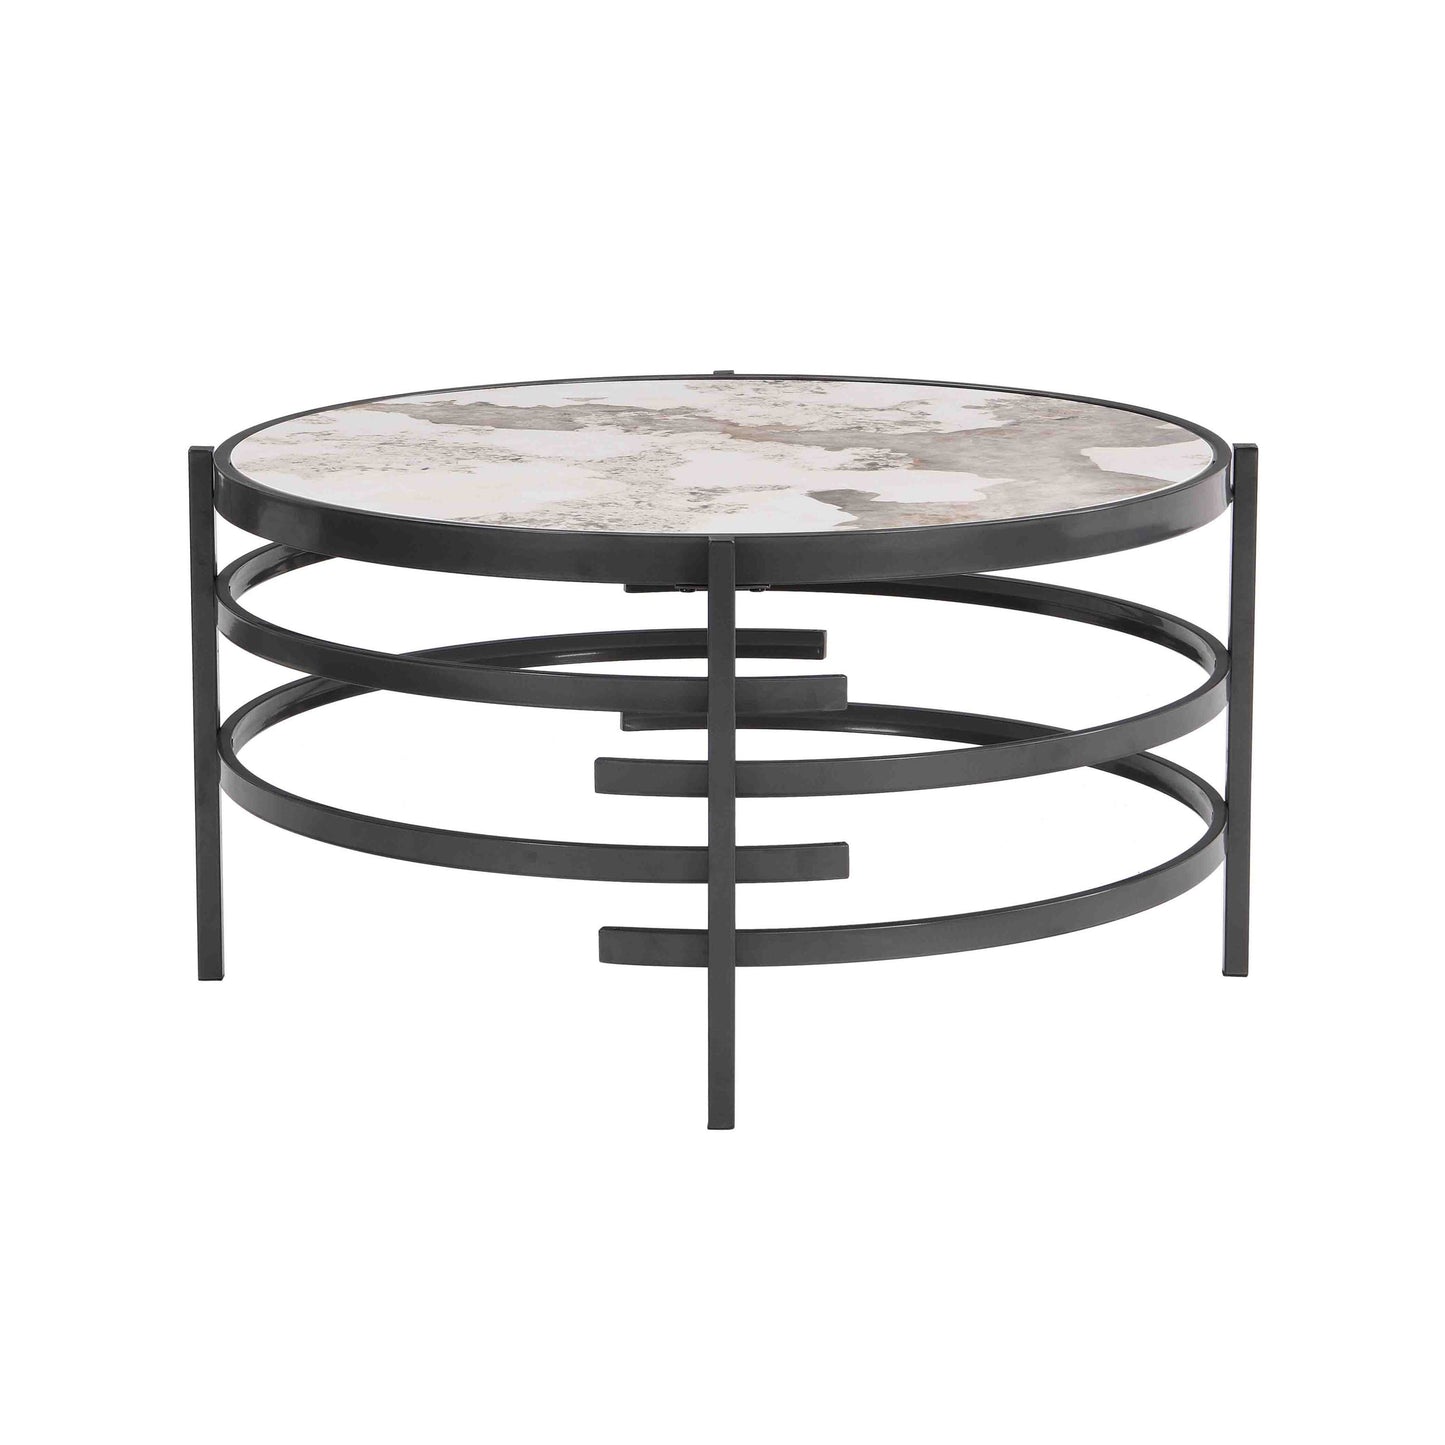 32.48'' Round  Coffee Table With Sintered Stone Top&Sturdy Metal Frame, Modern Coffee Table for Living Room, Darker Gray